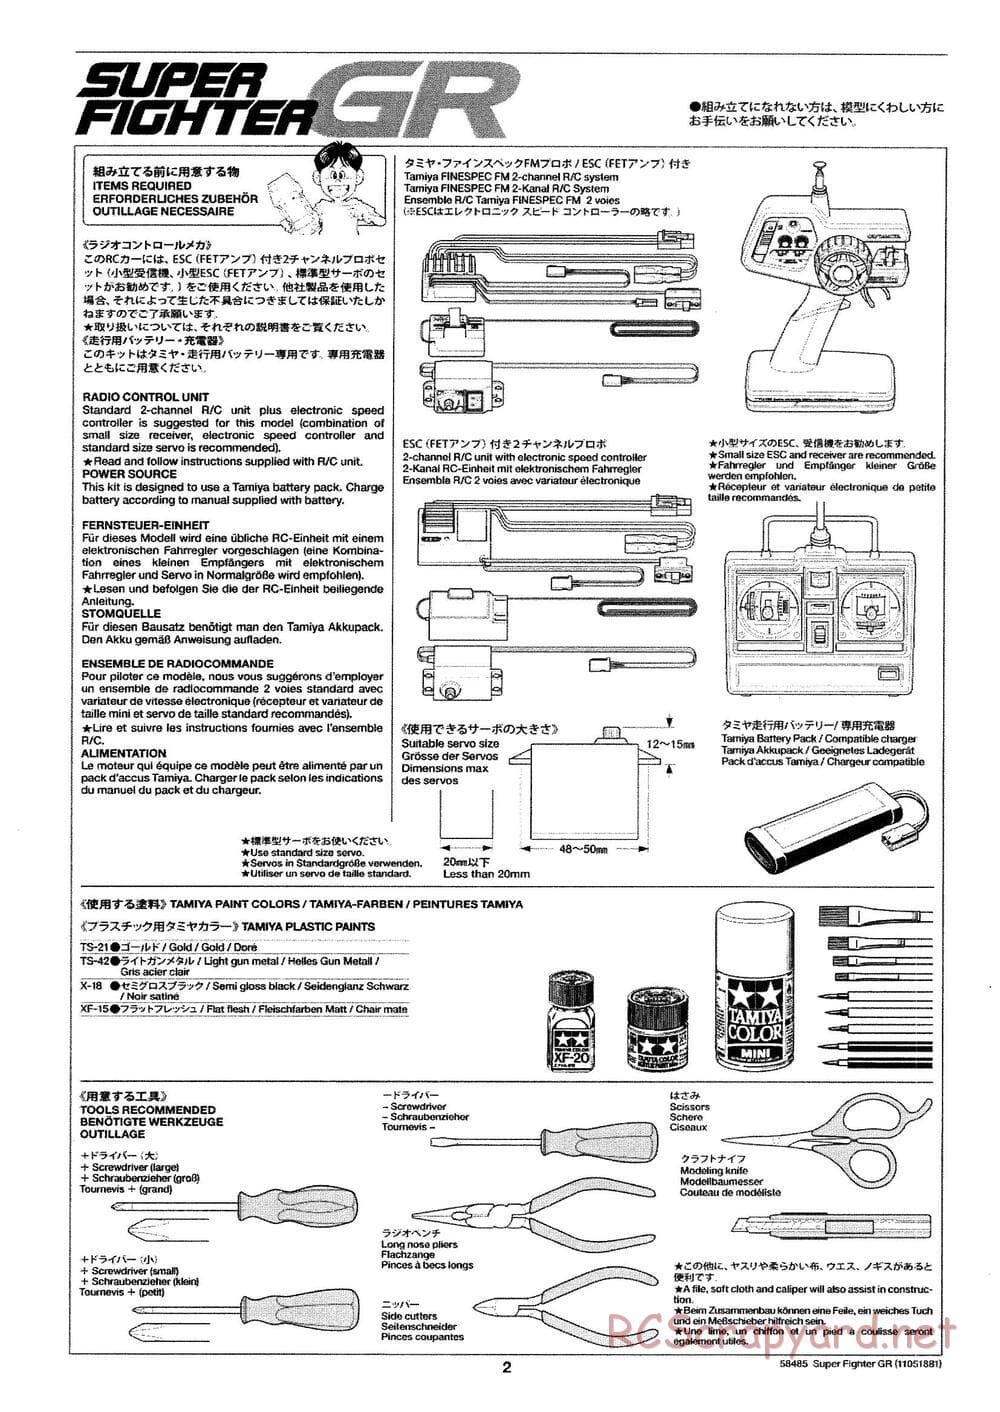 Tamiya - Super Fighter GR - DT-02 Chassis - Manual - Page 2